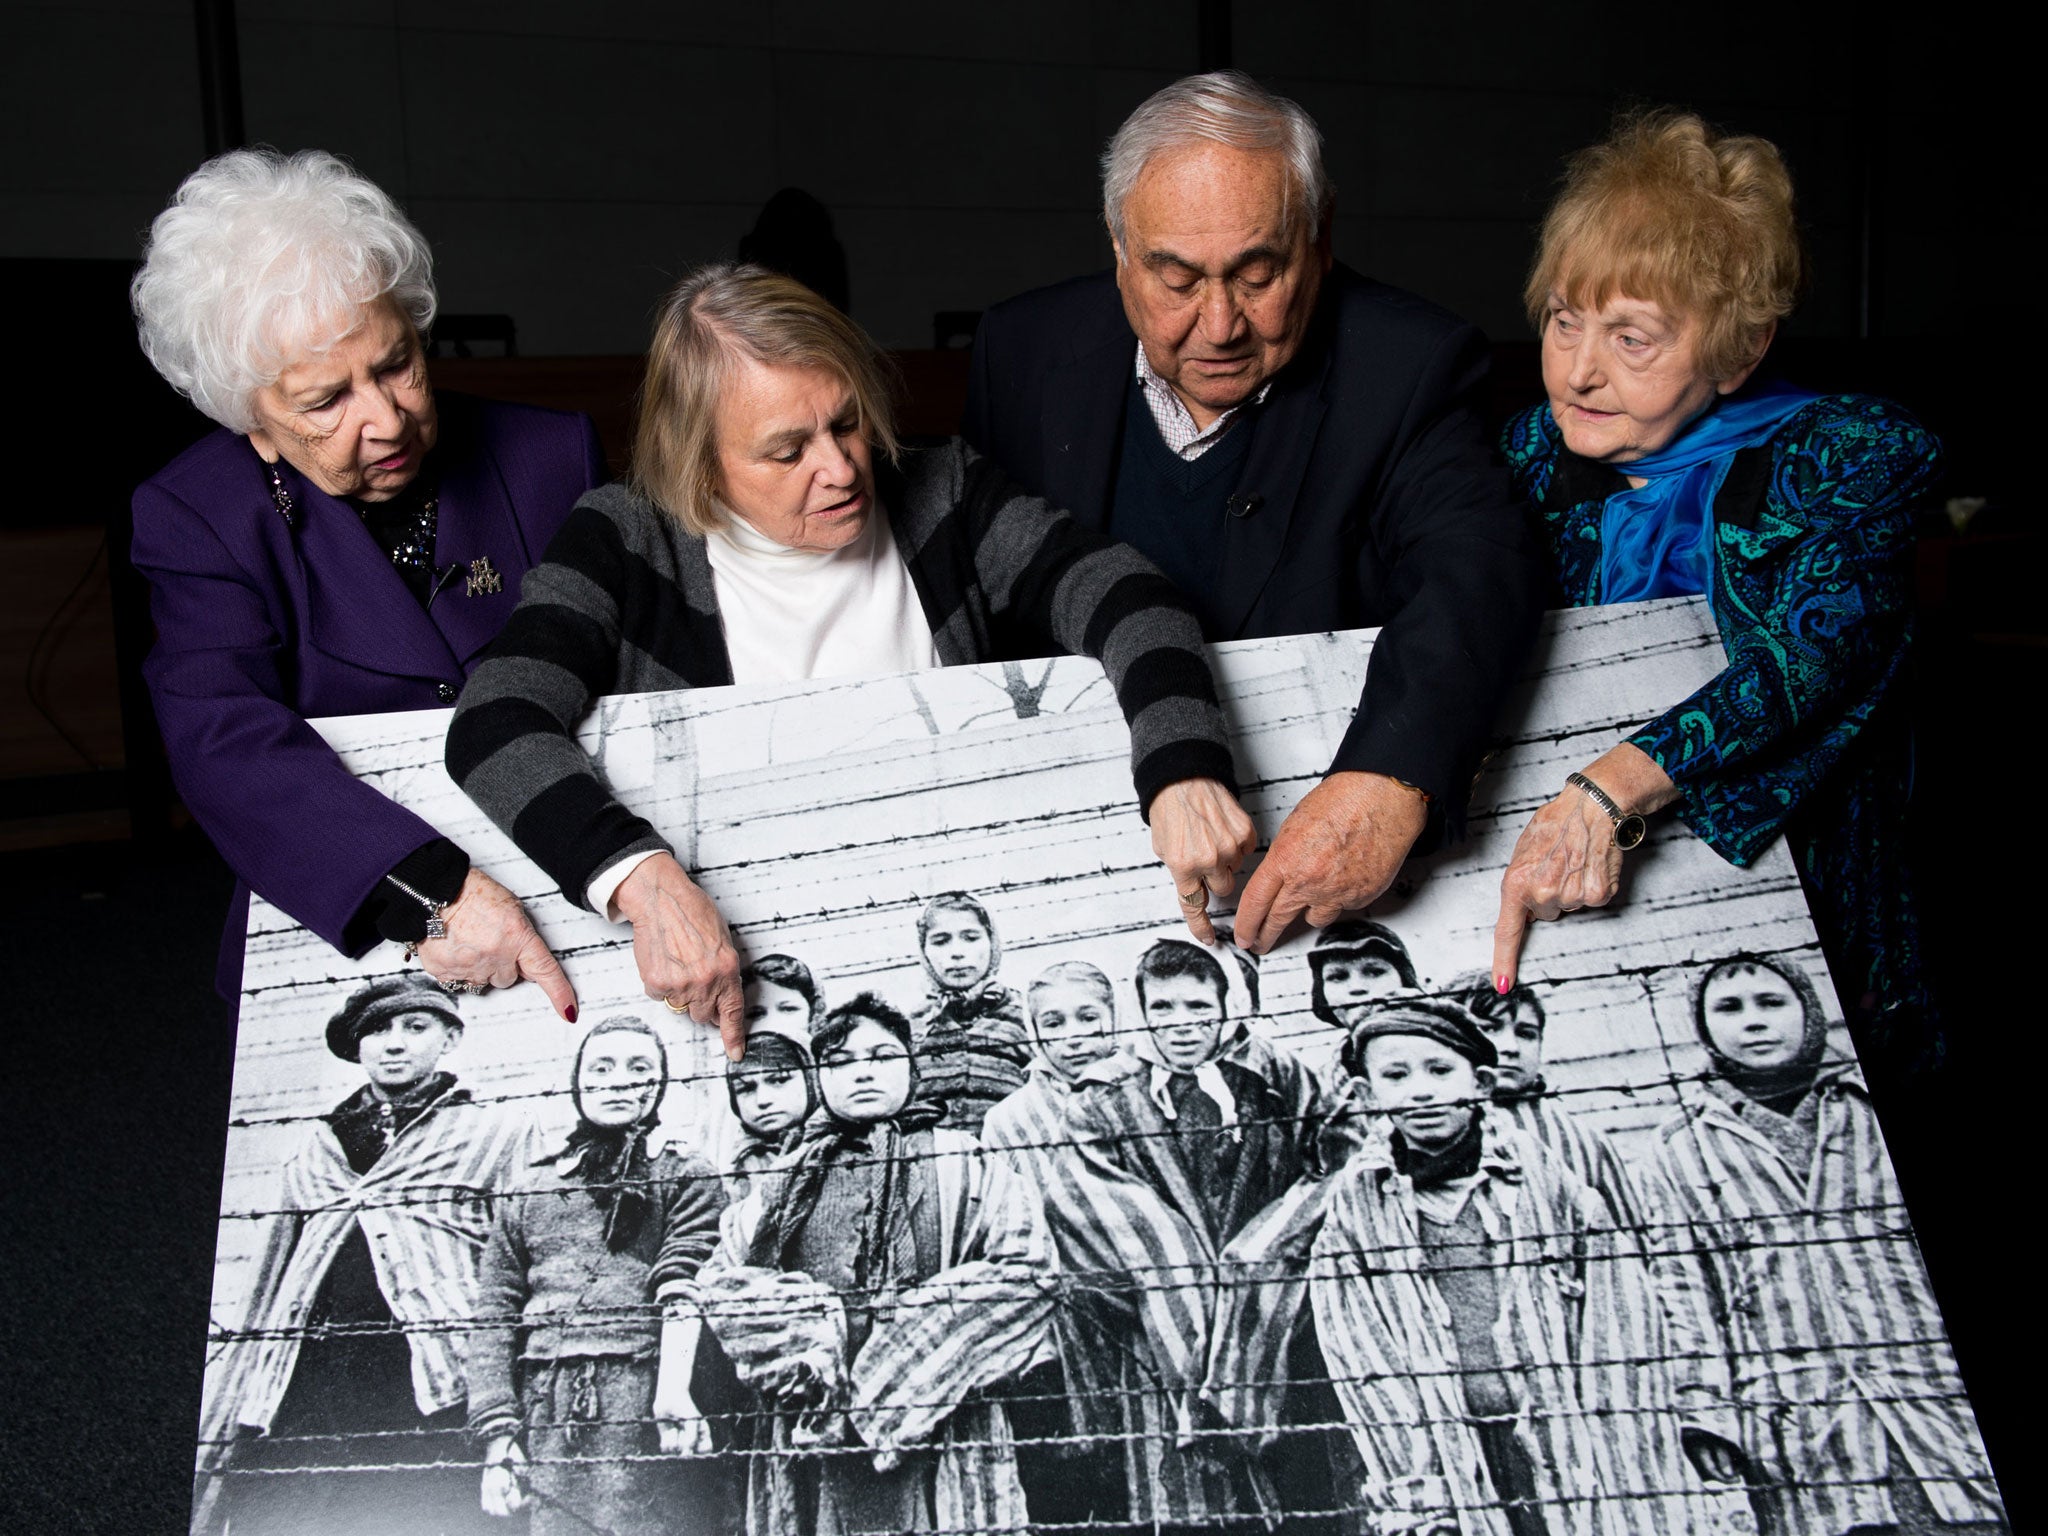 79-year-old Miriam Ziegler (left), 81-year-old Paula Lebovics, 85-year-old Gabor Hirsch and 80-year-old Eva Kor pose with the original image of them as children taken at Auschwitz at the time of its liberation on January 26, 2015 in Krakow, Poland.